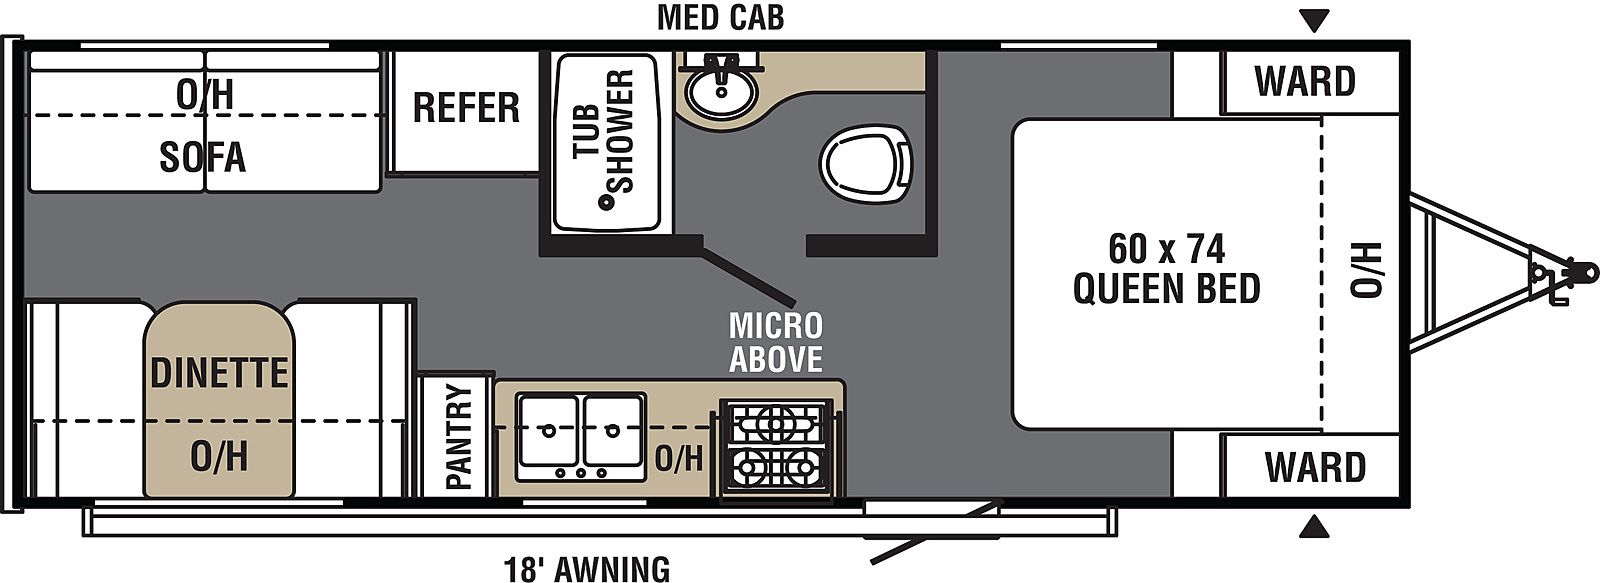 Viking Ultra-Lite 21RD floorplan. The 21RD has no slide outs and one entry door.